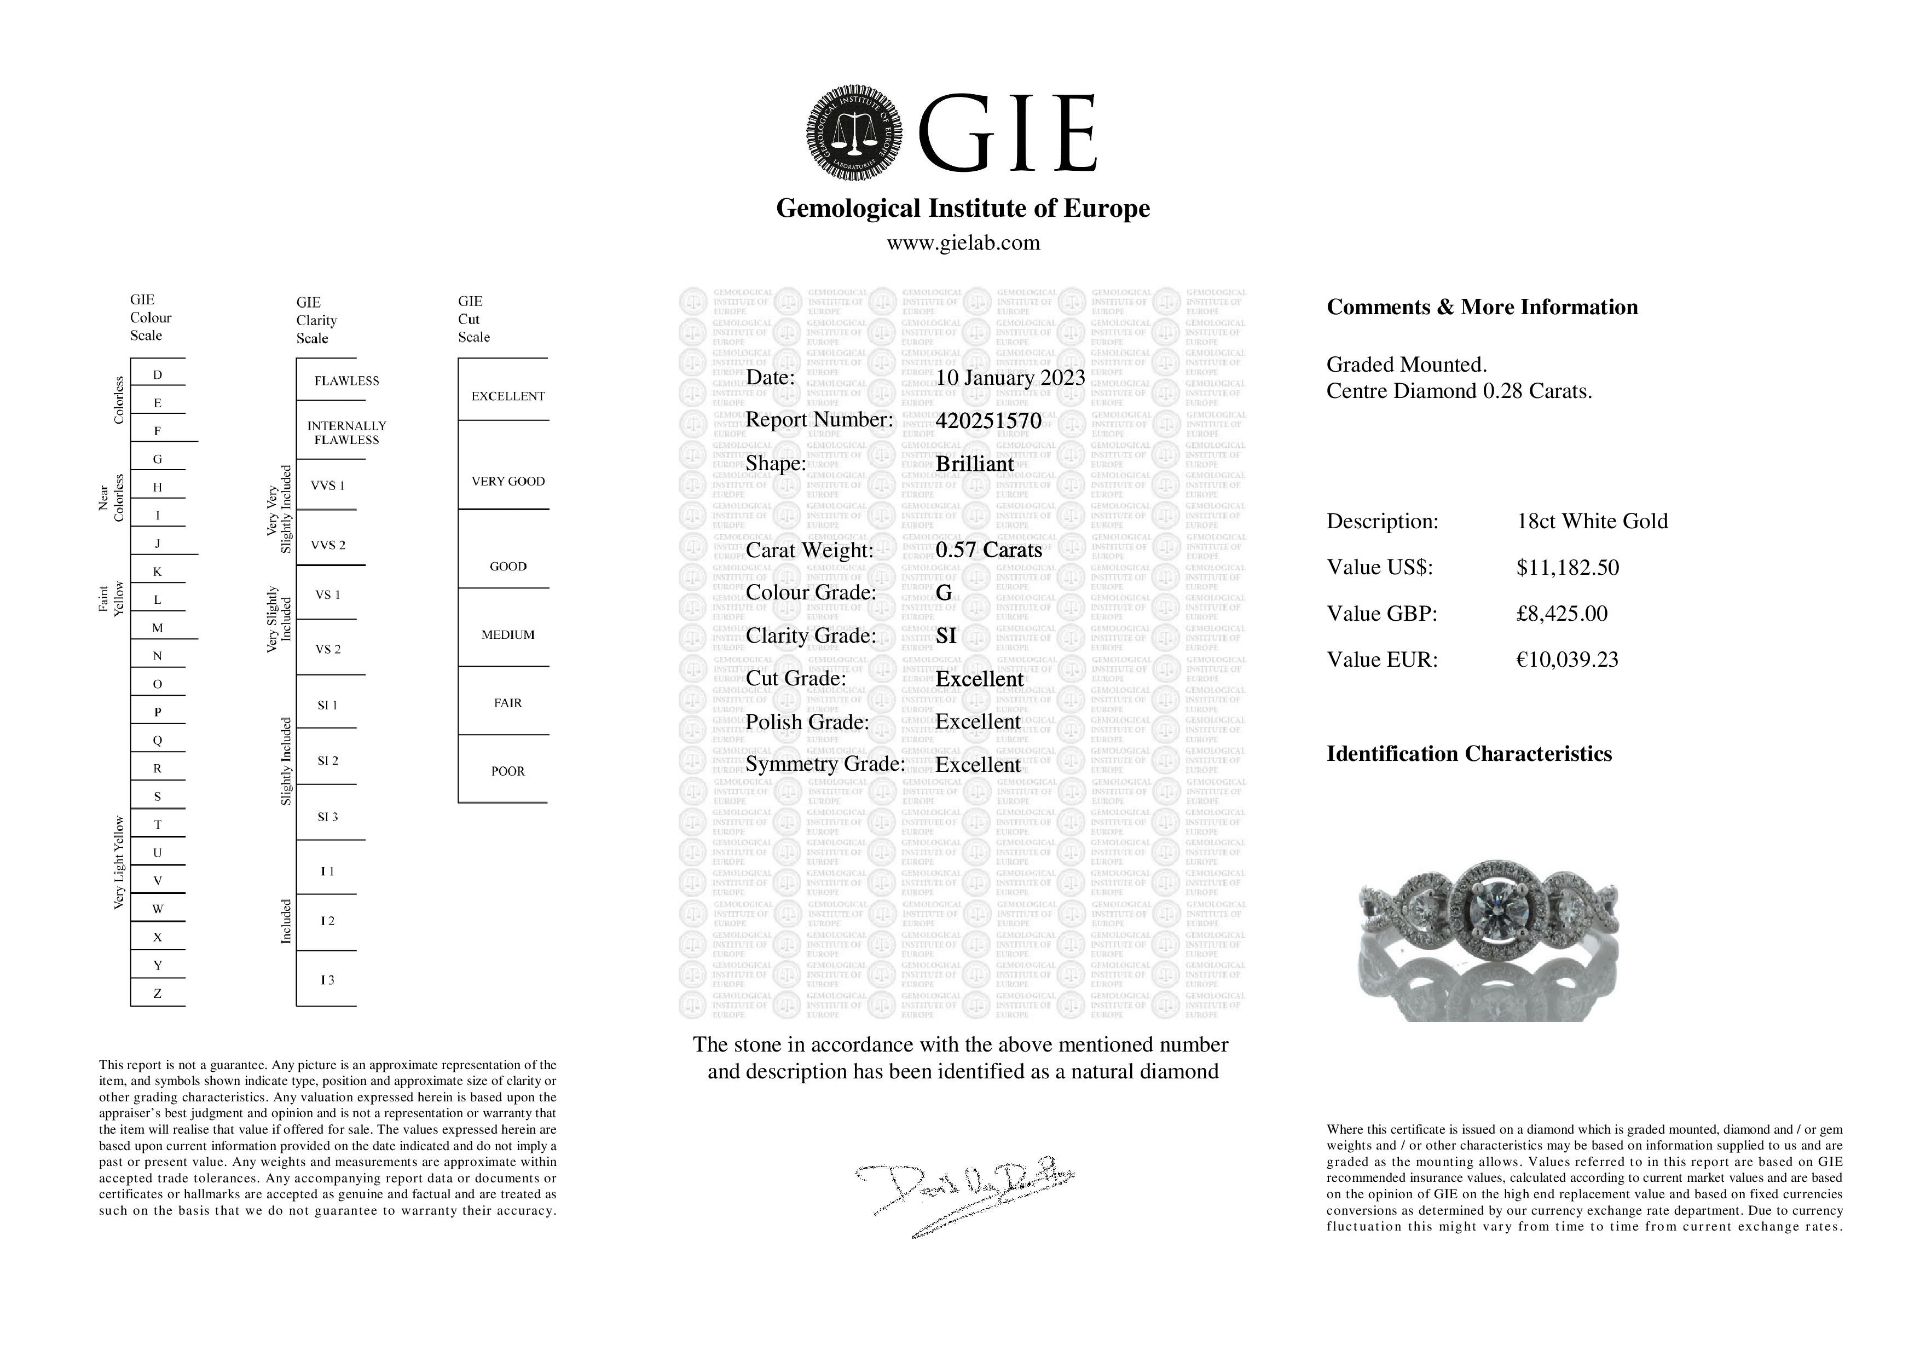 18ct White Gold Single Stone Fancy Claw Set Diamond Ring (0.28) 0.57 Carats - Valued By GIE £8,425. - Image 4 of 4